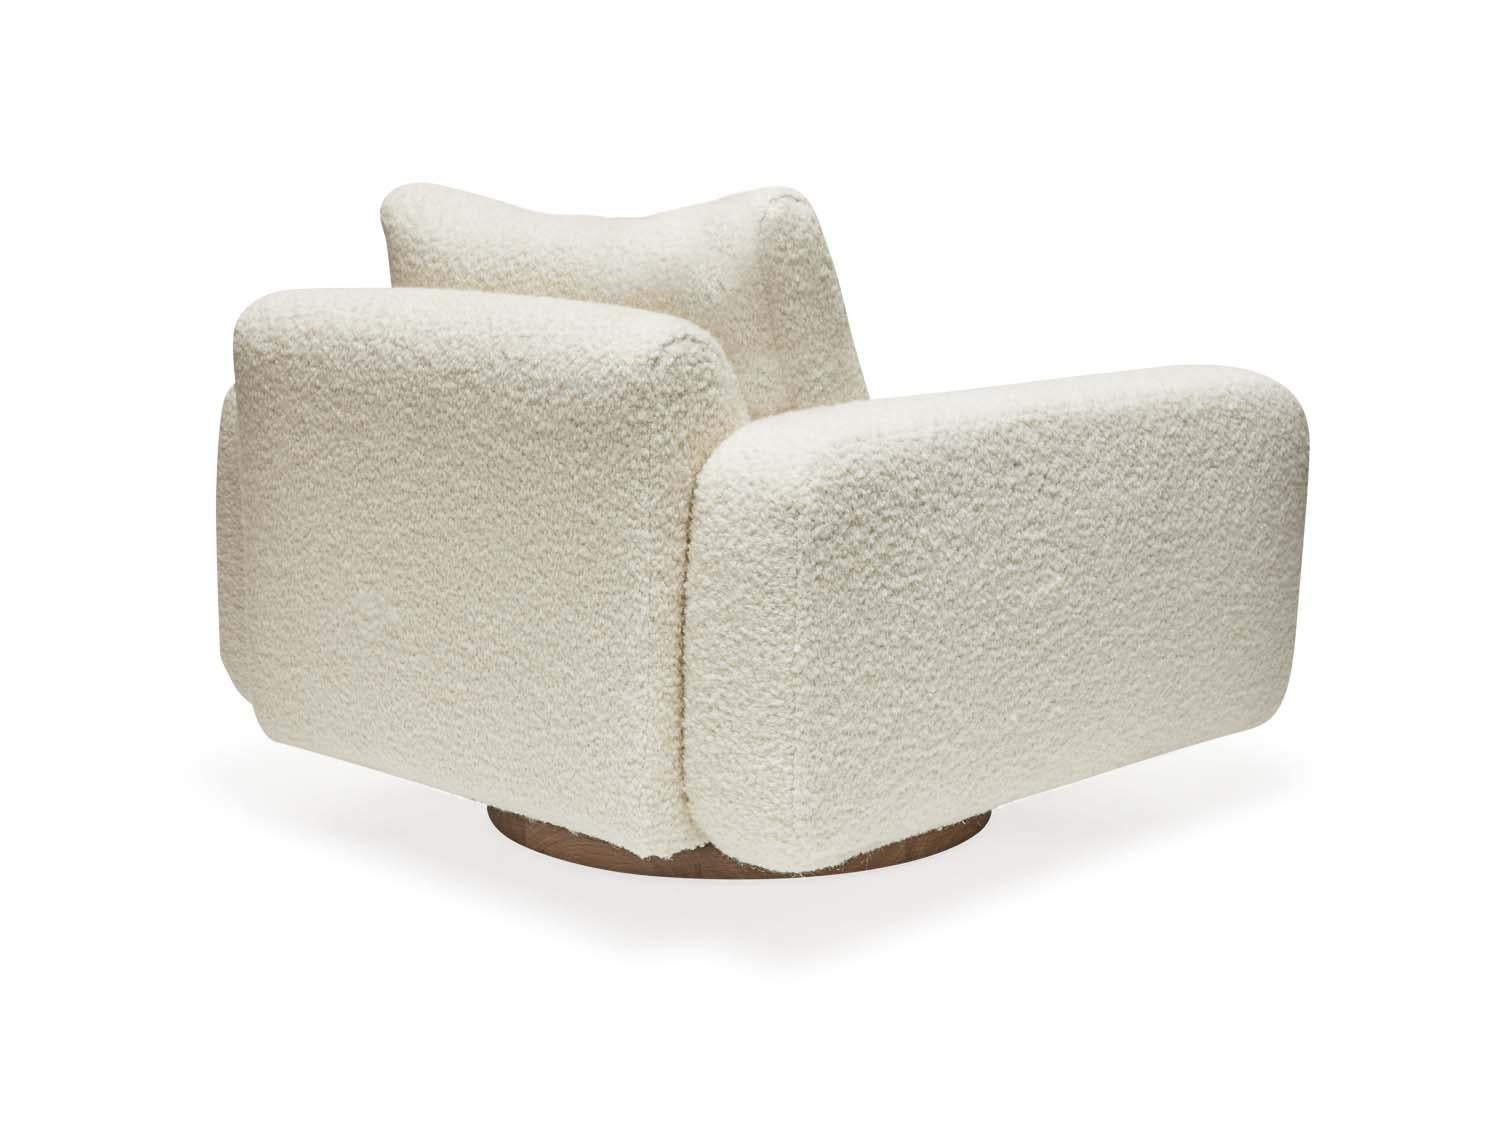 Mesa swivel chair by Lawson-Fenning in white Alpaca bouclé. The Mesa swivel chair is a fully upholstered club chair that features a walnut or oak inset base.

The Lawson-Fenning Collection is designed and handmade in Los Angeles, California. Reach